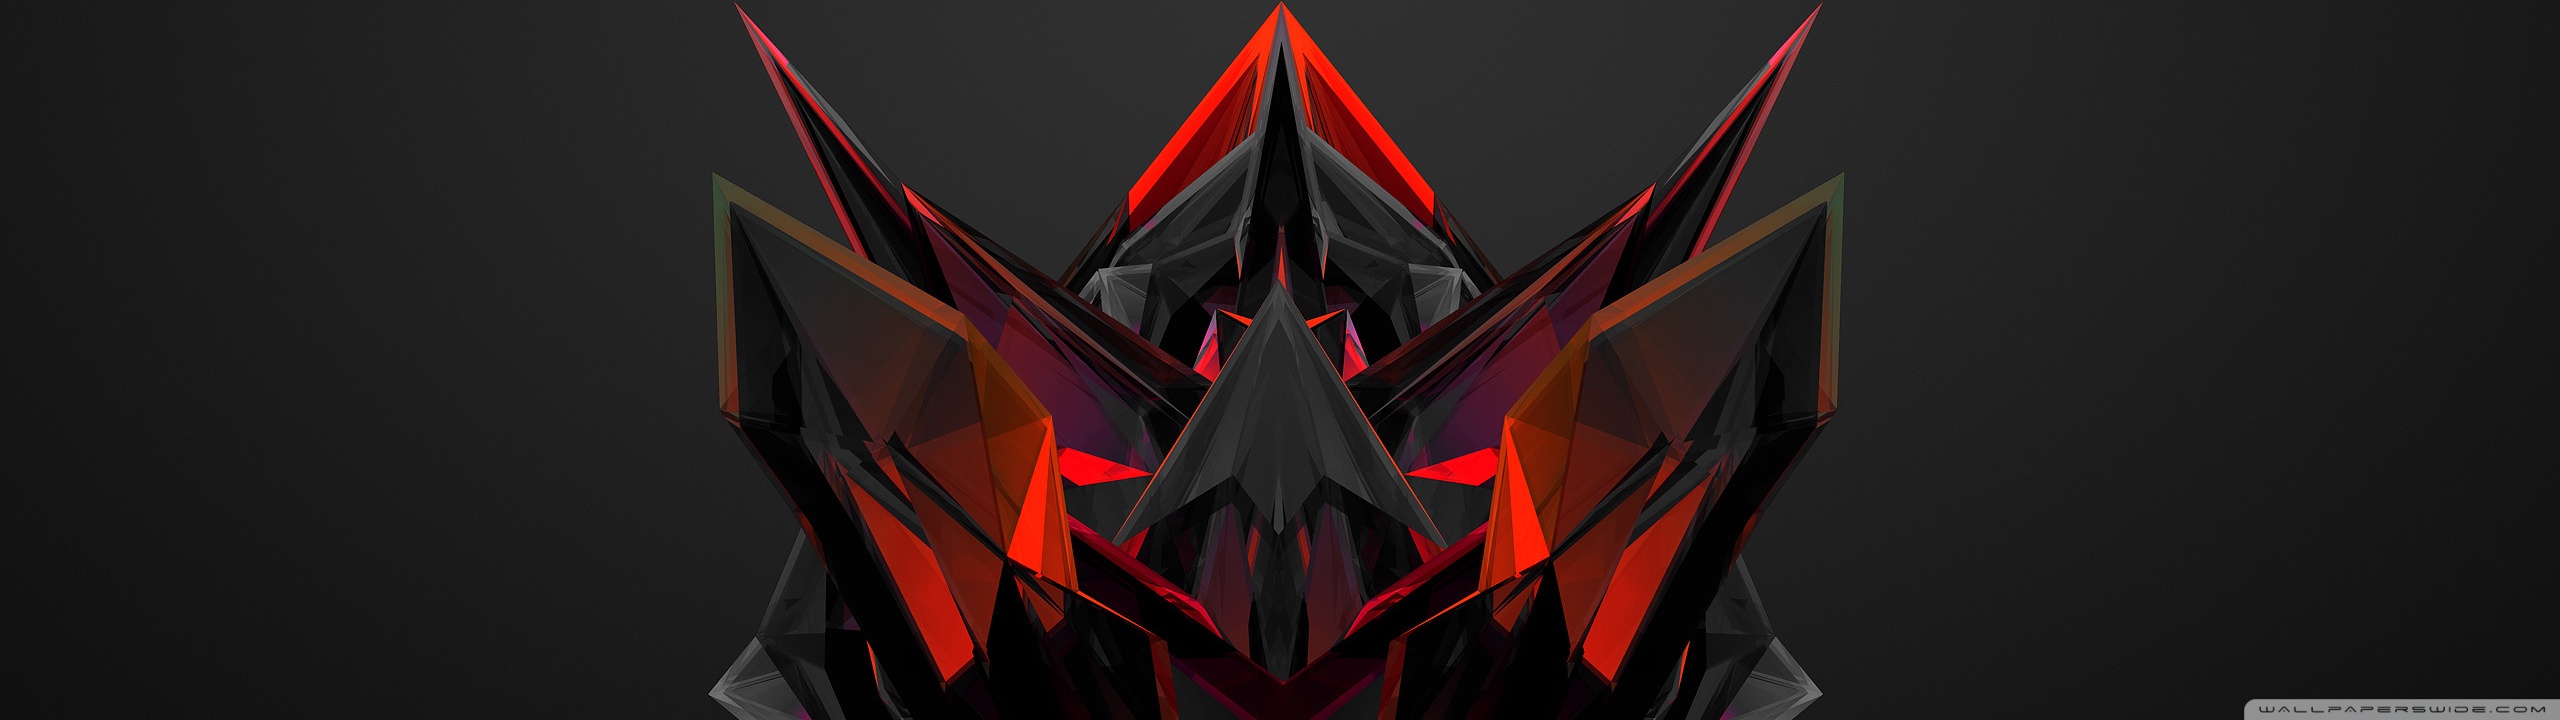 Black And Red Dual Monitor - 2560x720 Wallpaper 